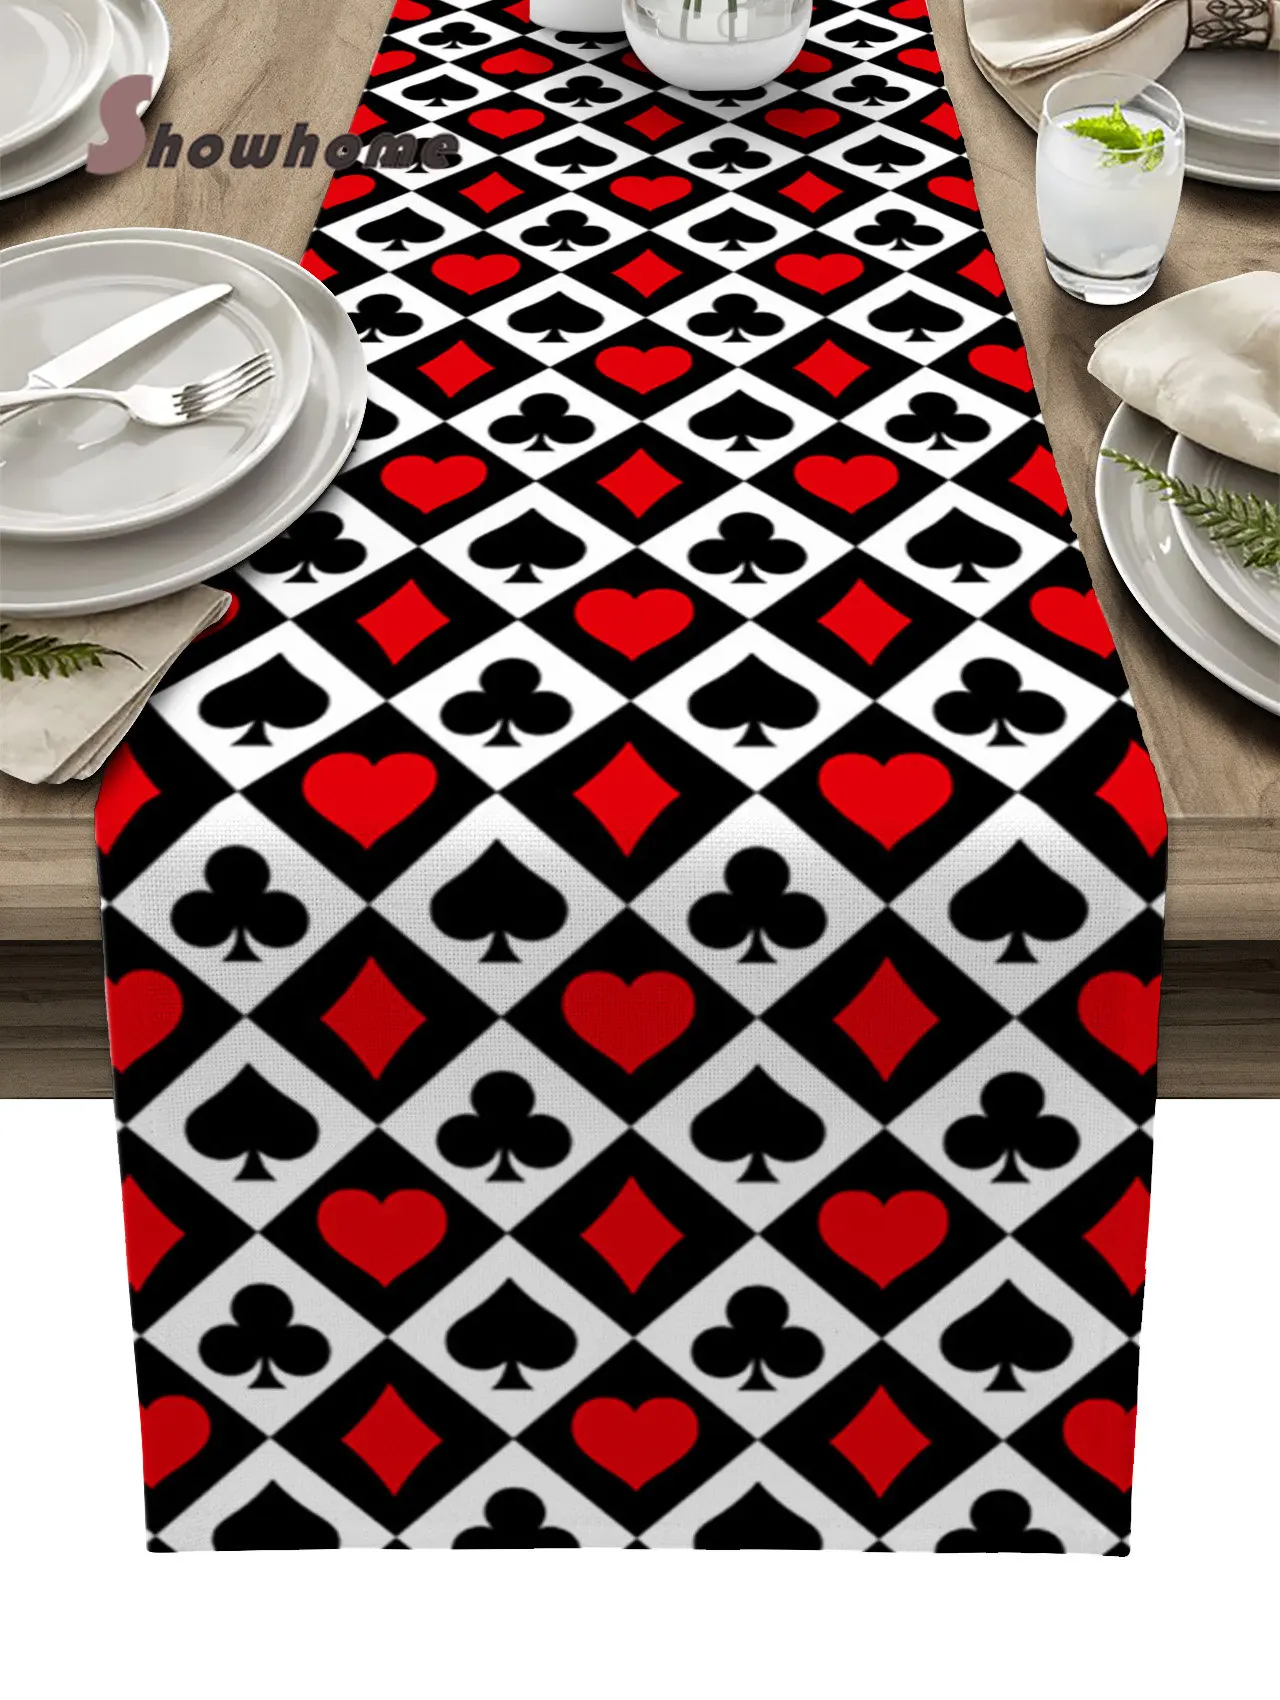 

Poker Squares Spades Hearts Plaid Table Runner Modern Party Dining Table Runner Wedding Table Decor Tablecloth and Placemats